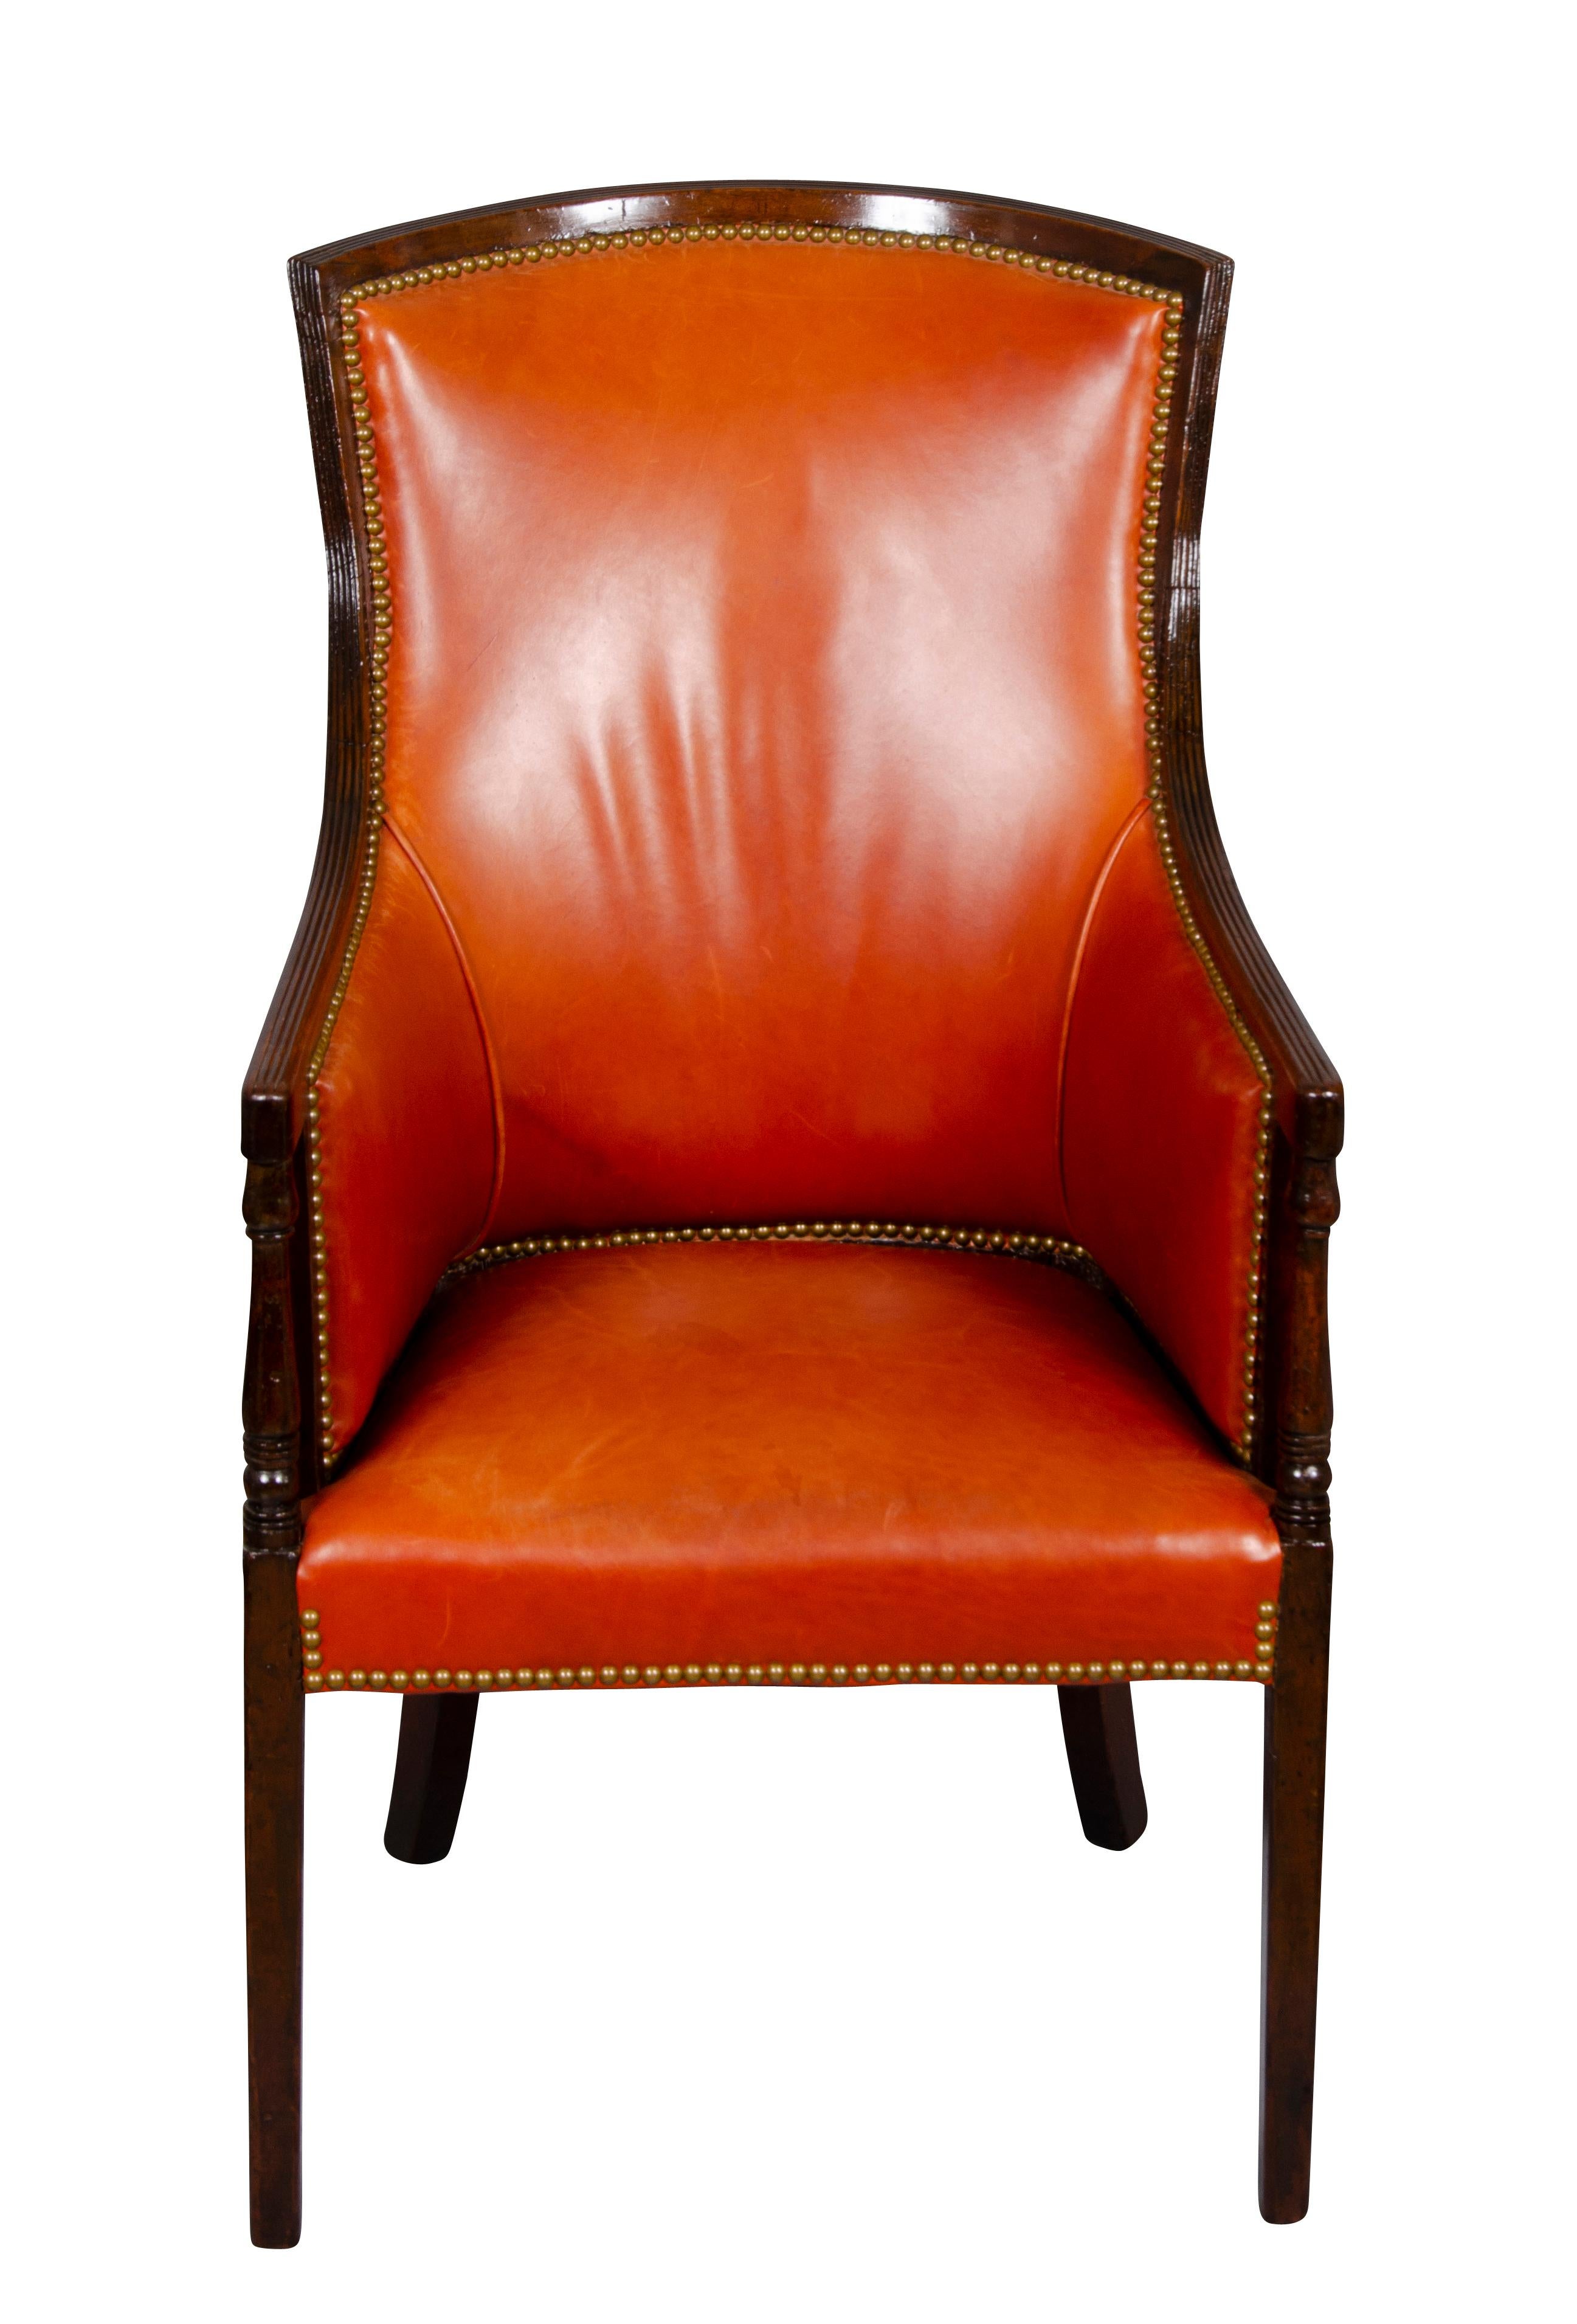 With nice tacked red leather with curved back, downswept arms raised on square tapered legs.